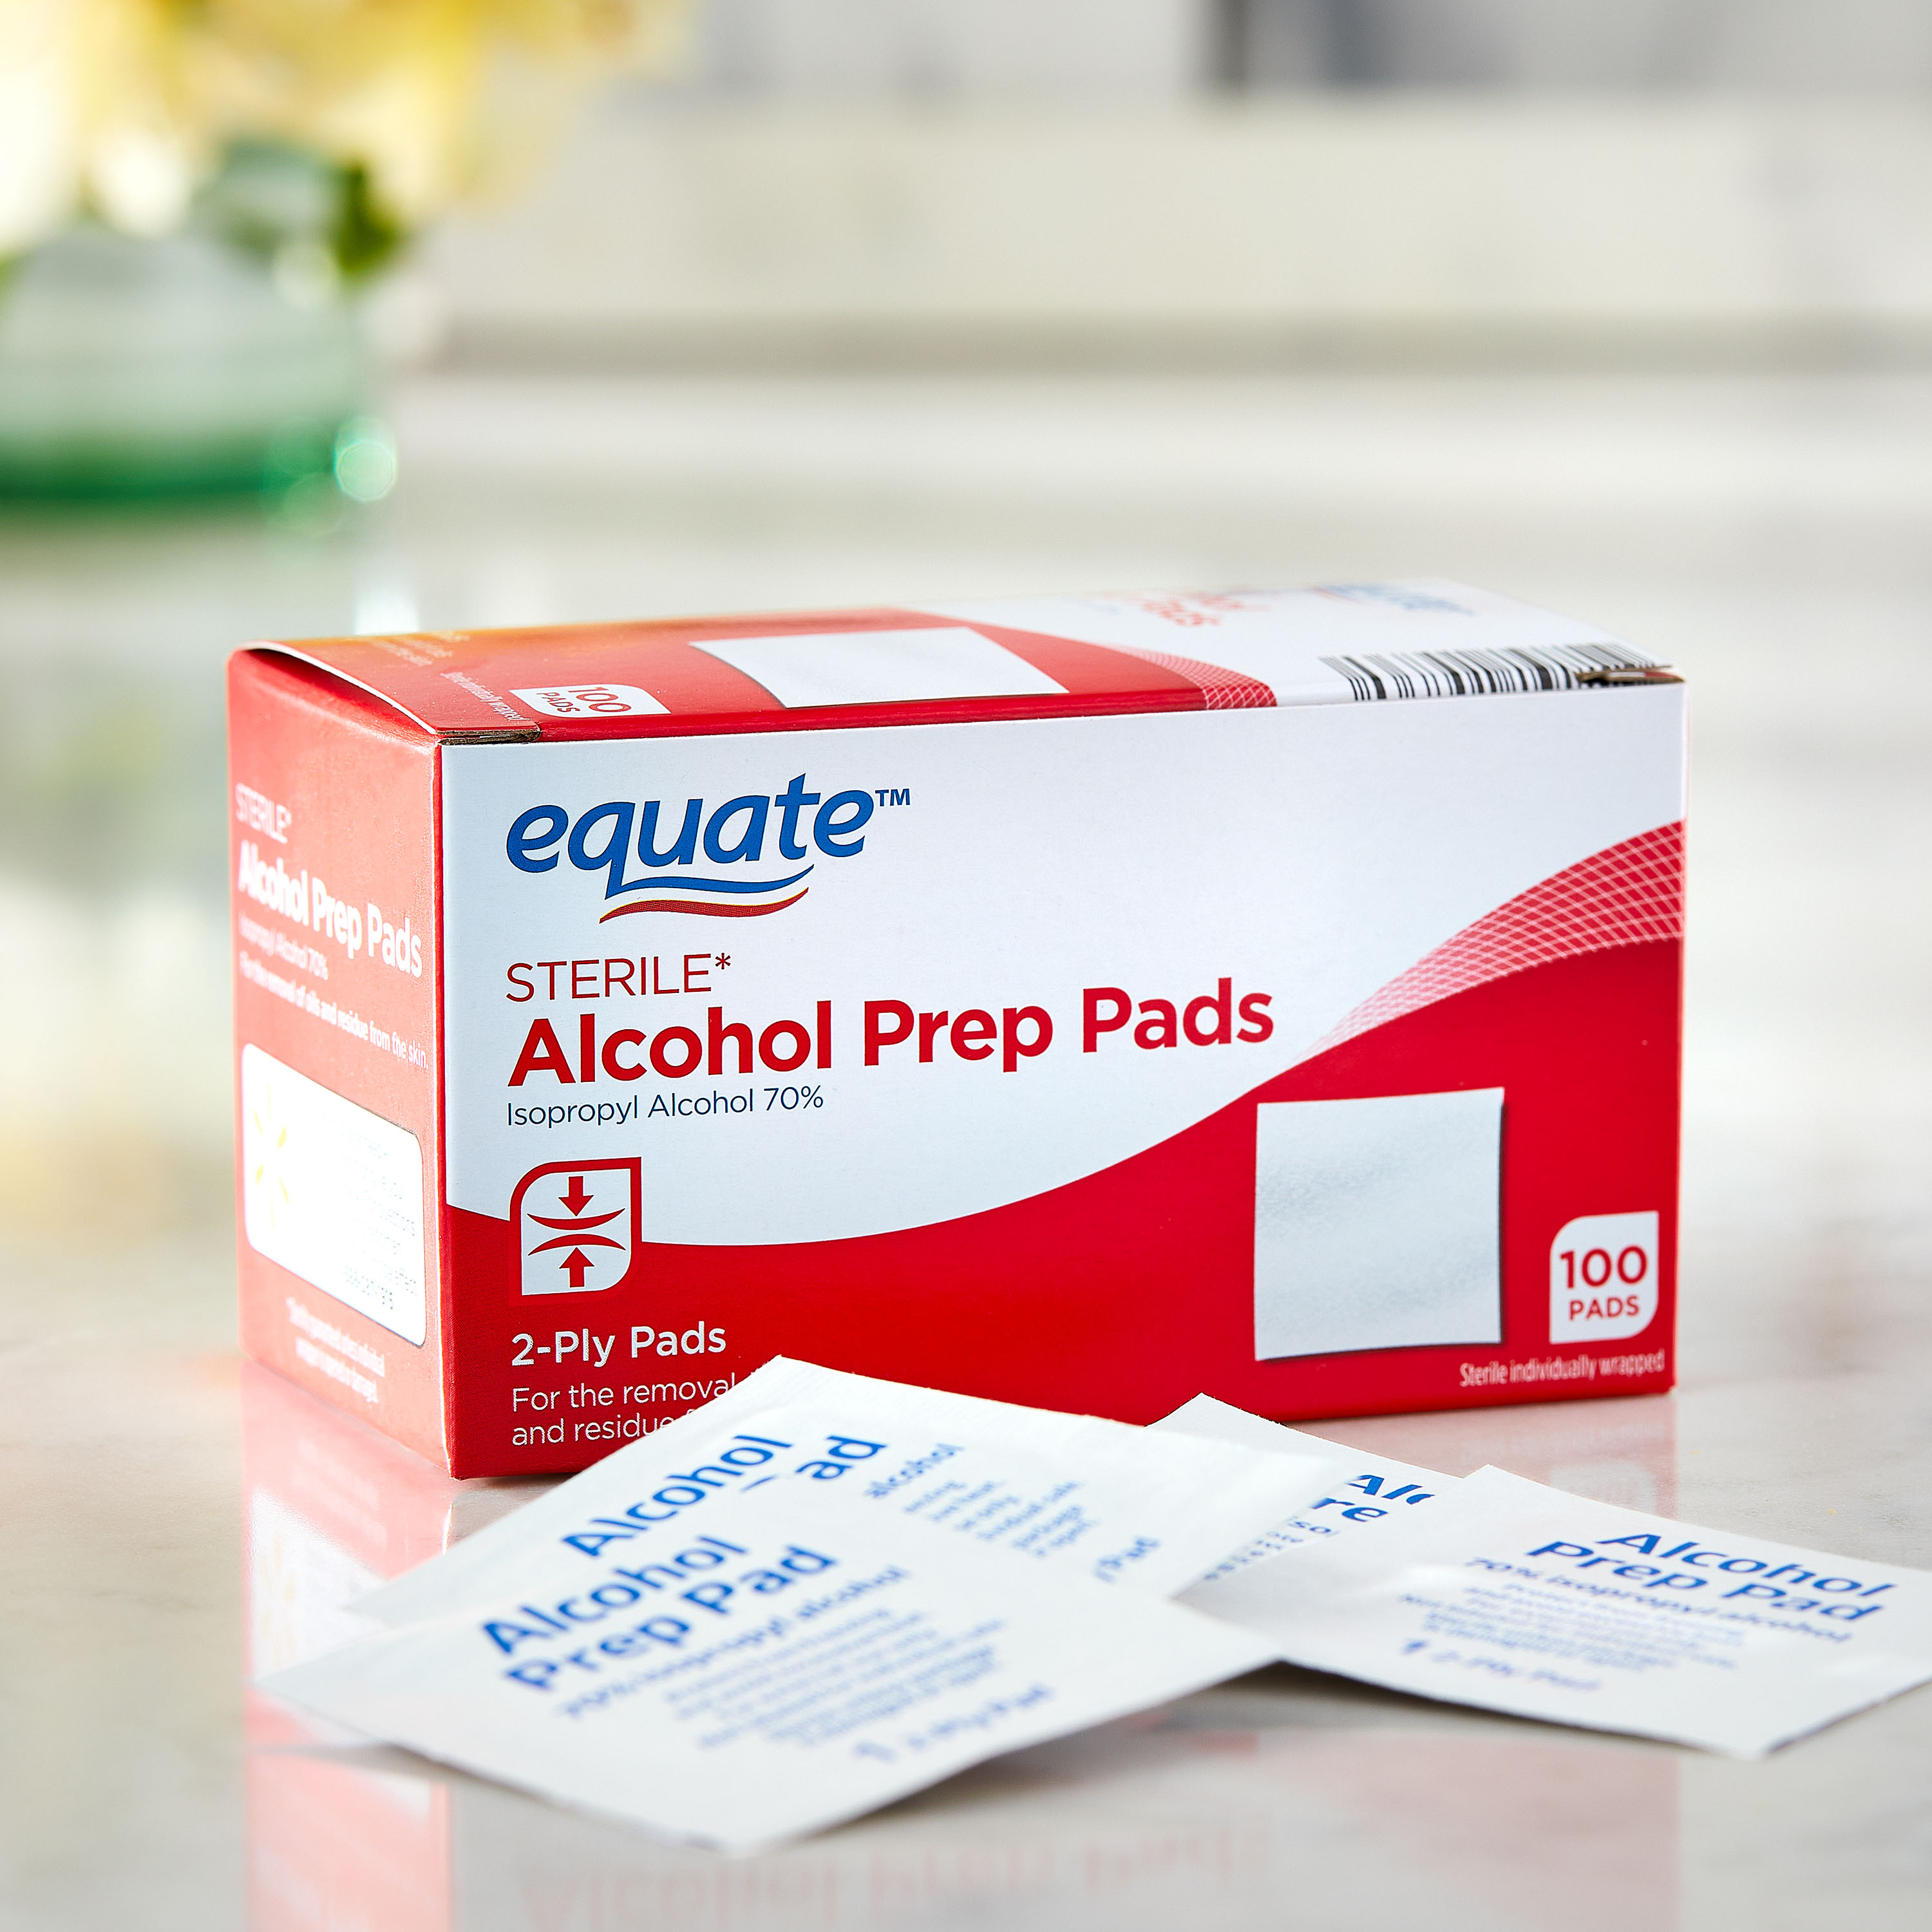 Equate Sterile Alcohol Prep Pads, 100 Count - image 2 of 8